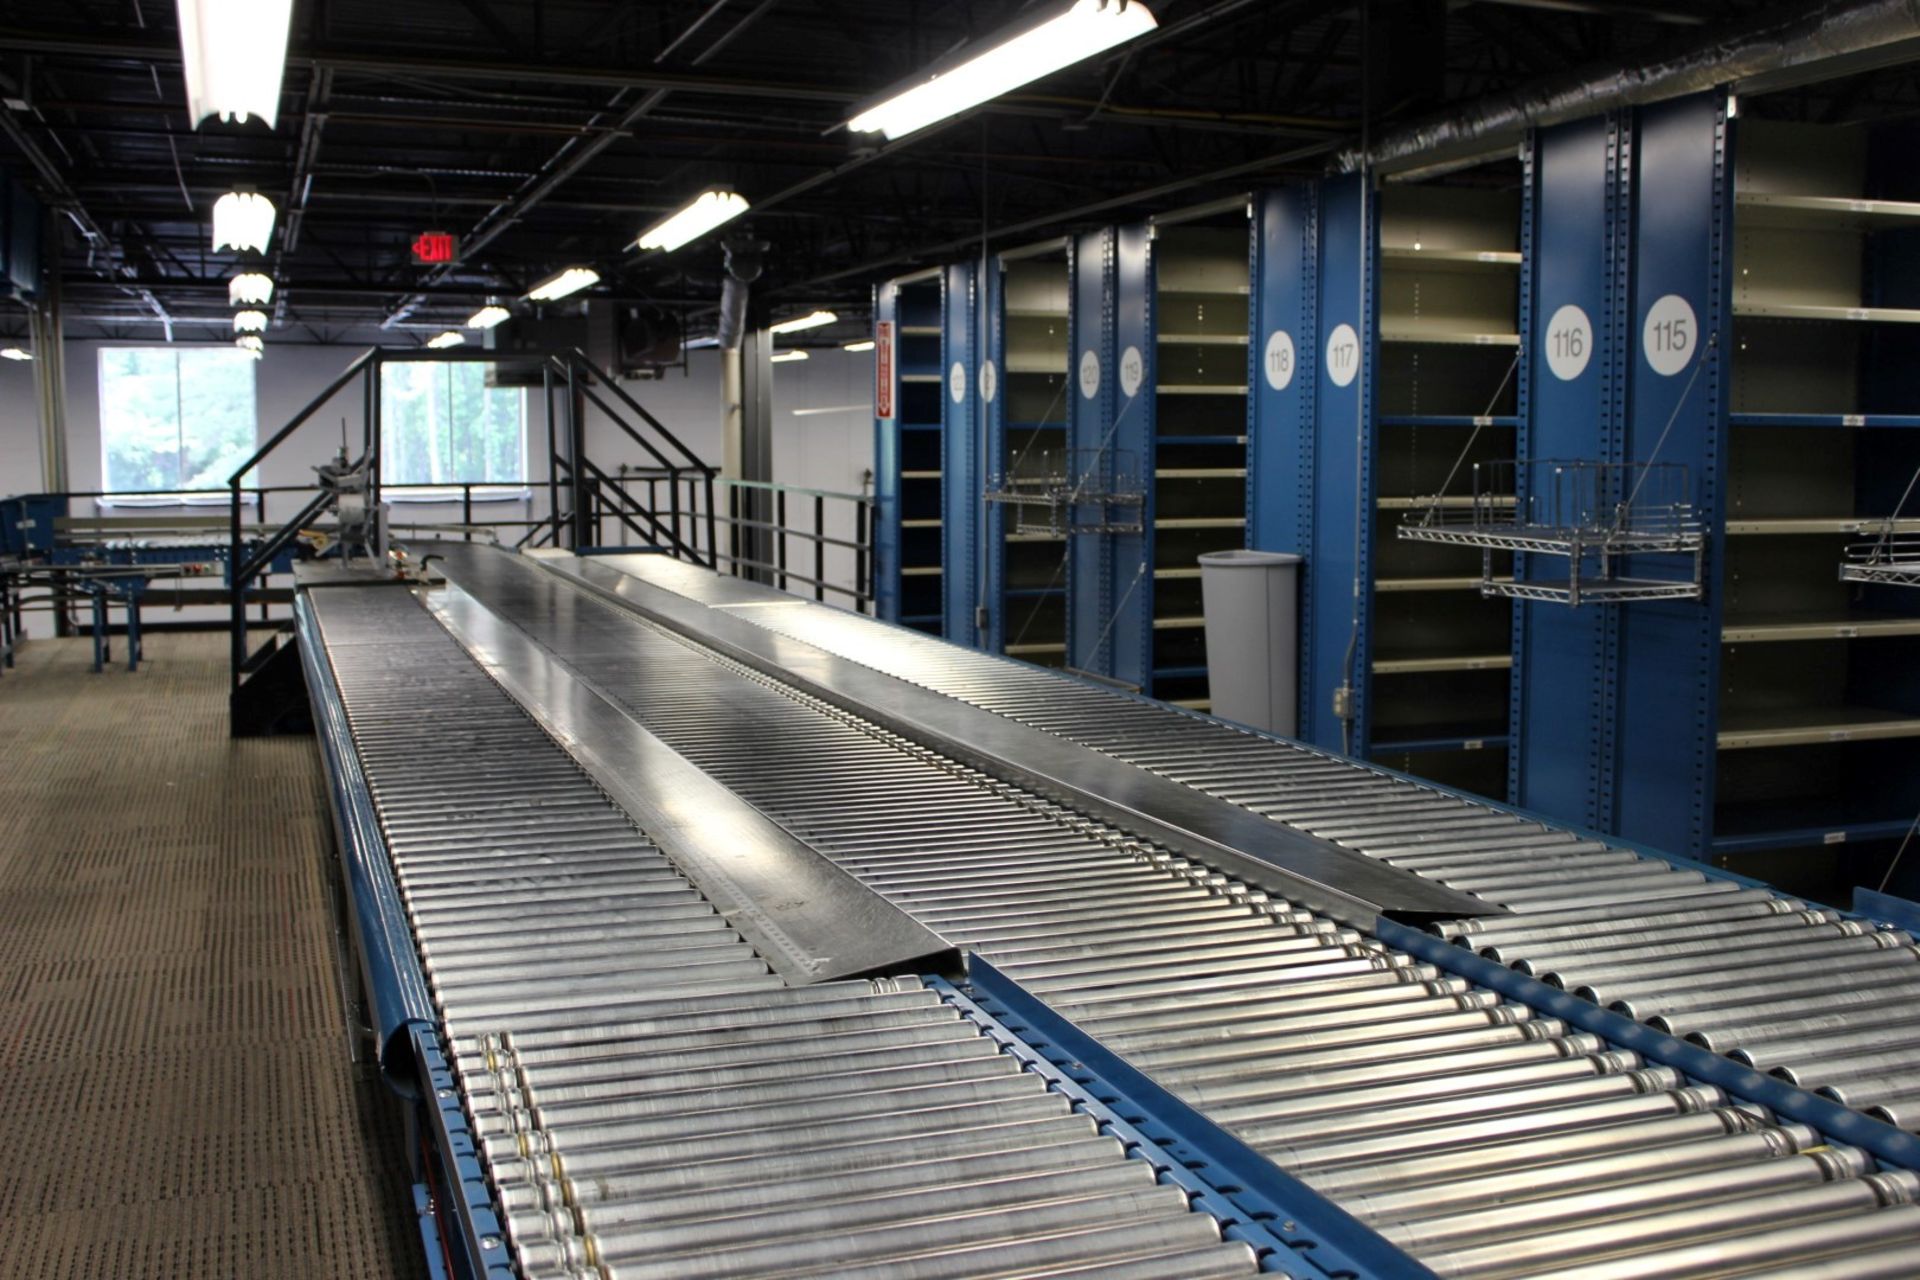 40 FT LONG 24"W RAPISTAN POWERED CONVEYOR WITH 18"W GRAVITY CONVEYOR LINES BOTH SIDES